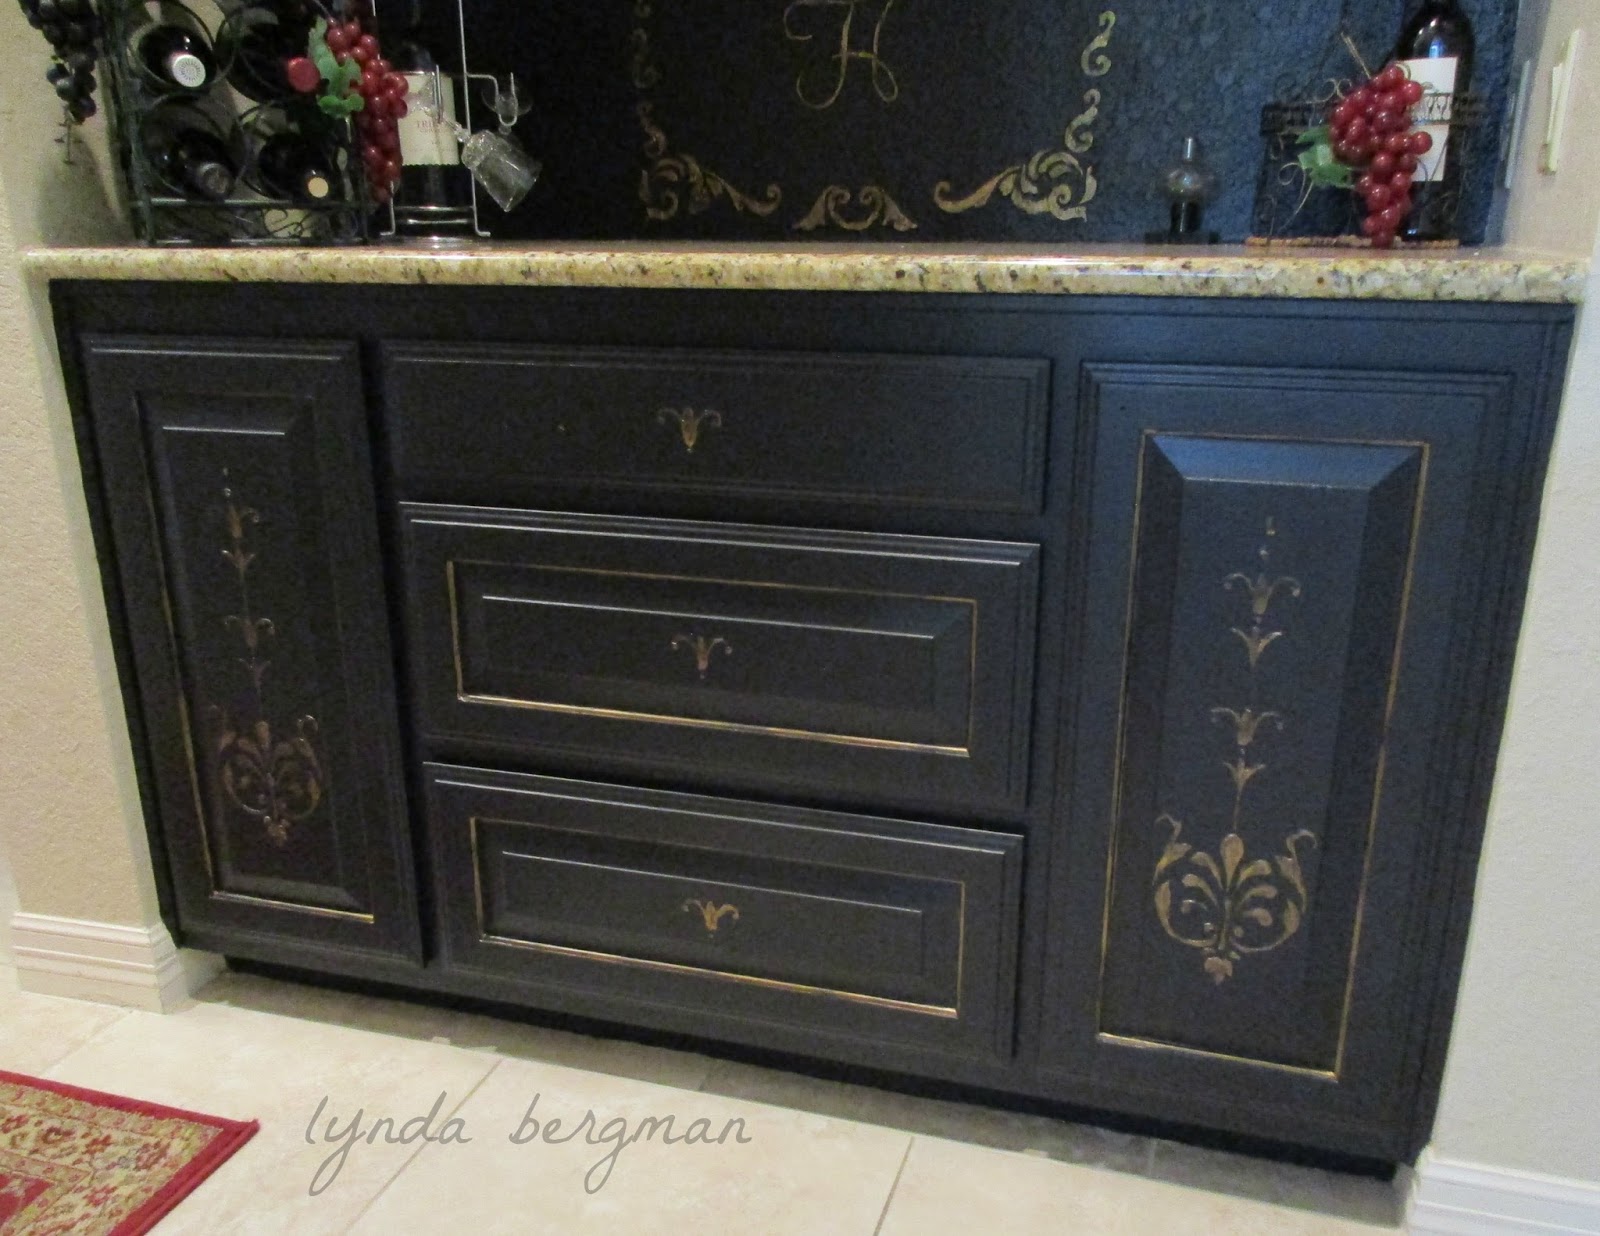 LYNDA BERGMAN DECORATIVE ARTISAN: PAINTING CABINETS FROM STAINED OAK TO A BLACK DISTRESSED 